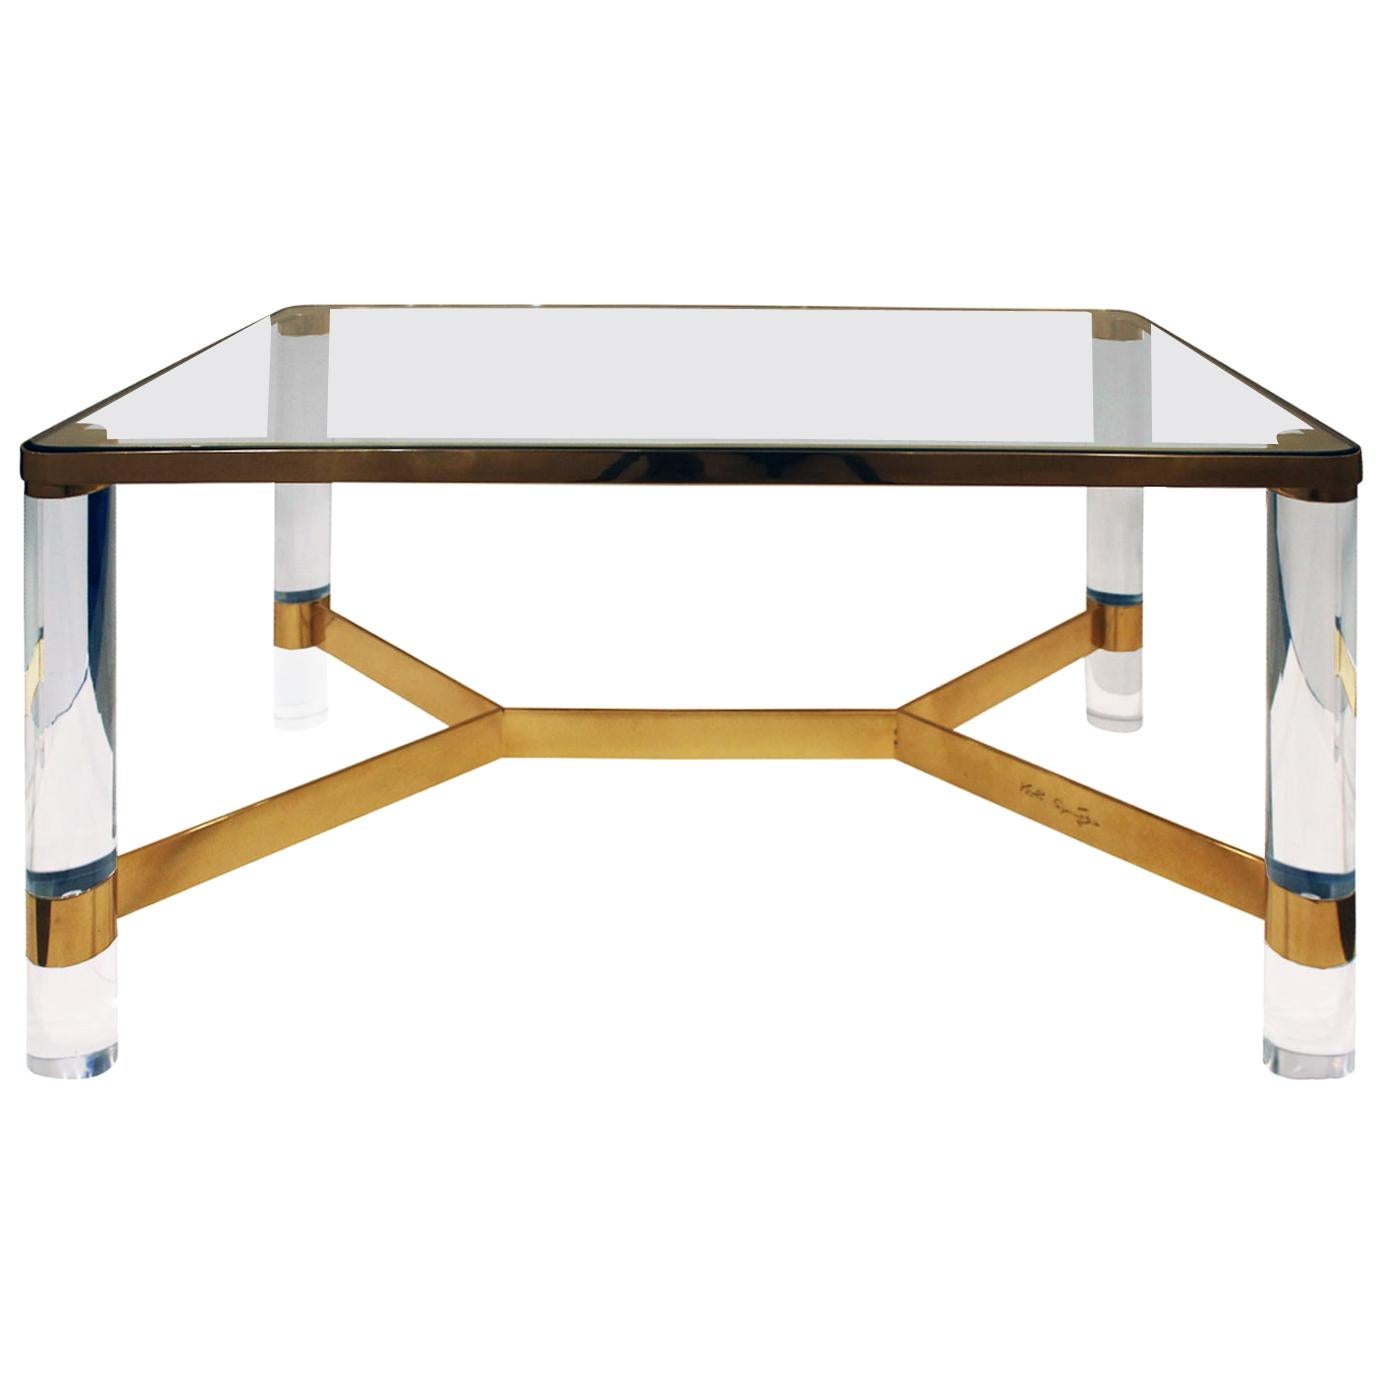 Karl Springer Exceptional "Round Leg Lucite Coffee Table" 1980s, Signed